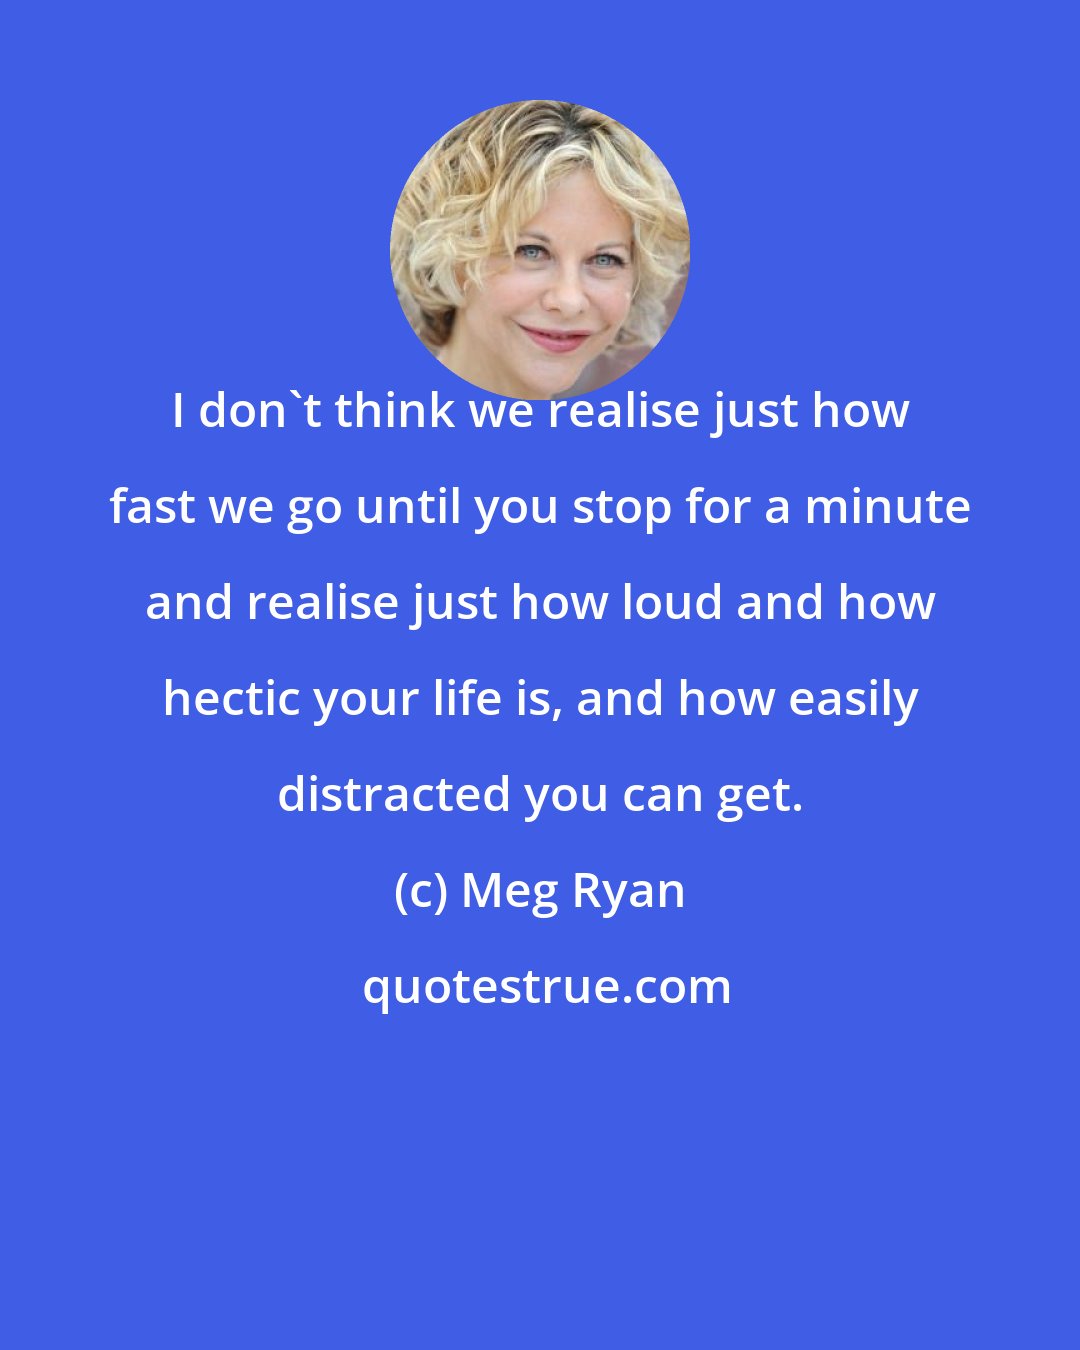 Meg Ryan: I don't think we realise just how fast we go until you stop for a minute and realise just how loud and how hectic your life is, and how easily distracted you can get.